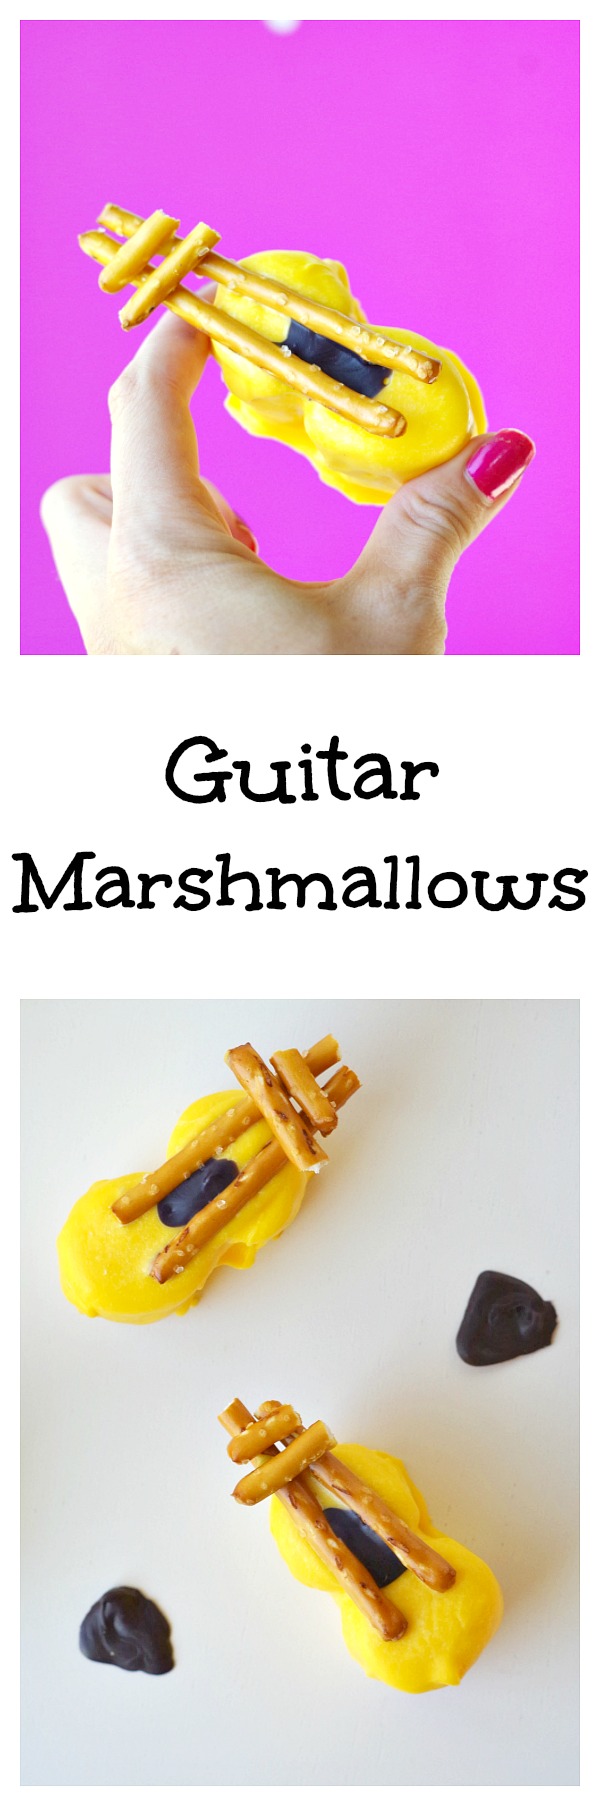 Chcolate Covered Guitar Marshmallows! These marshmallows are perfect for the music lover or a rock n roll party dessert.